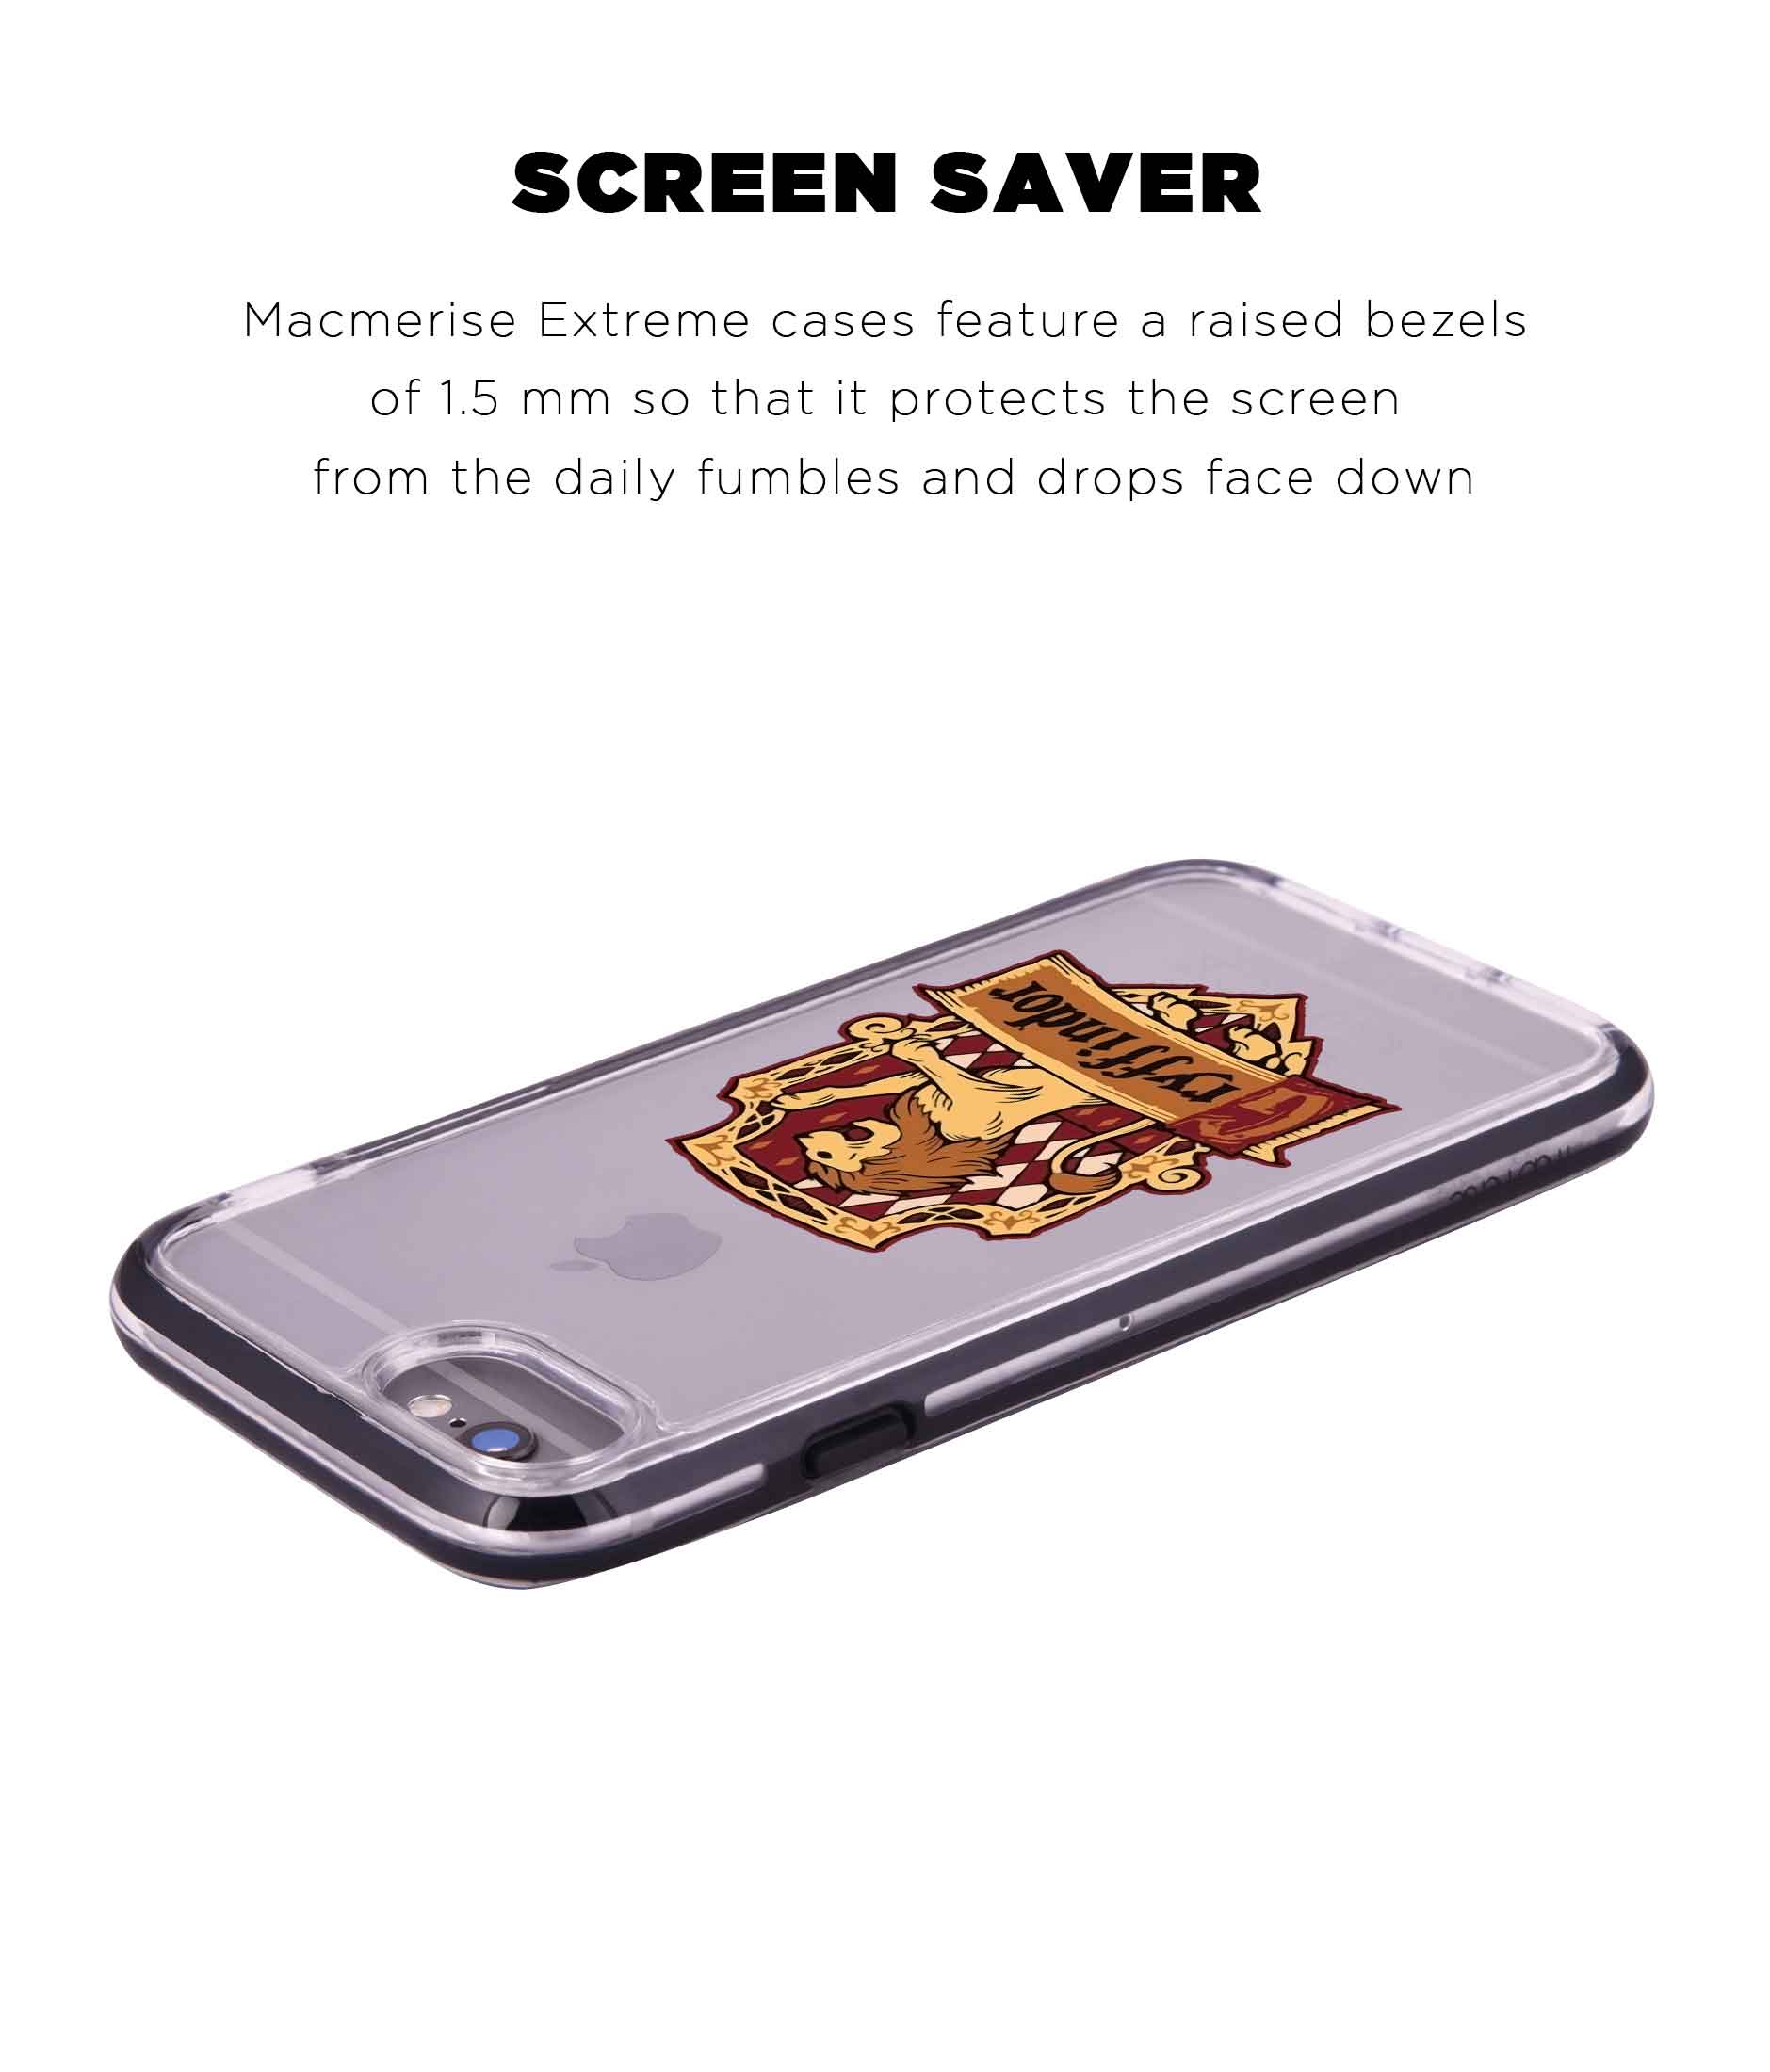 Crest Gryffindor - Extreme Phone Case for iPhone 6